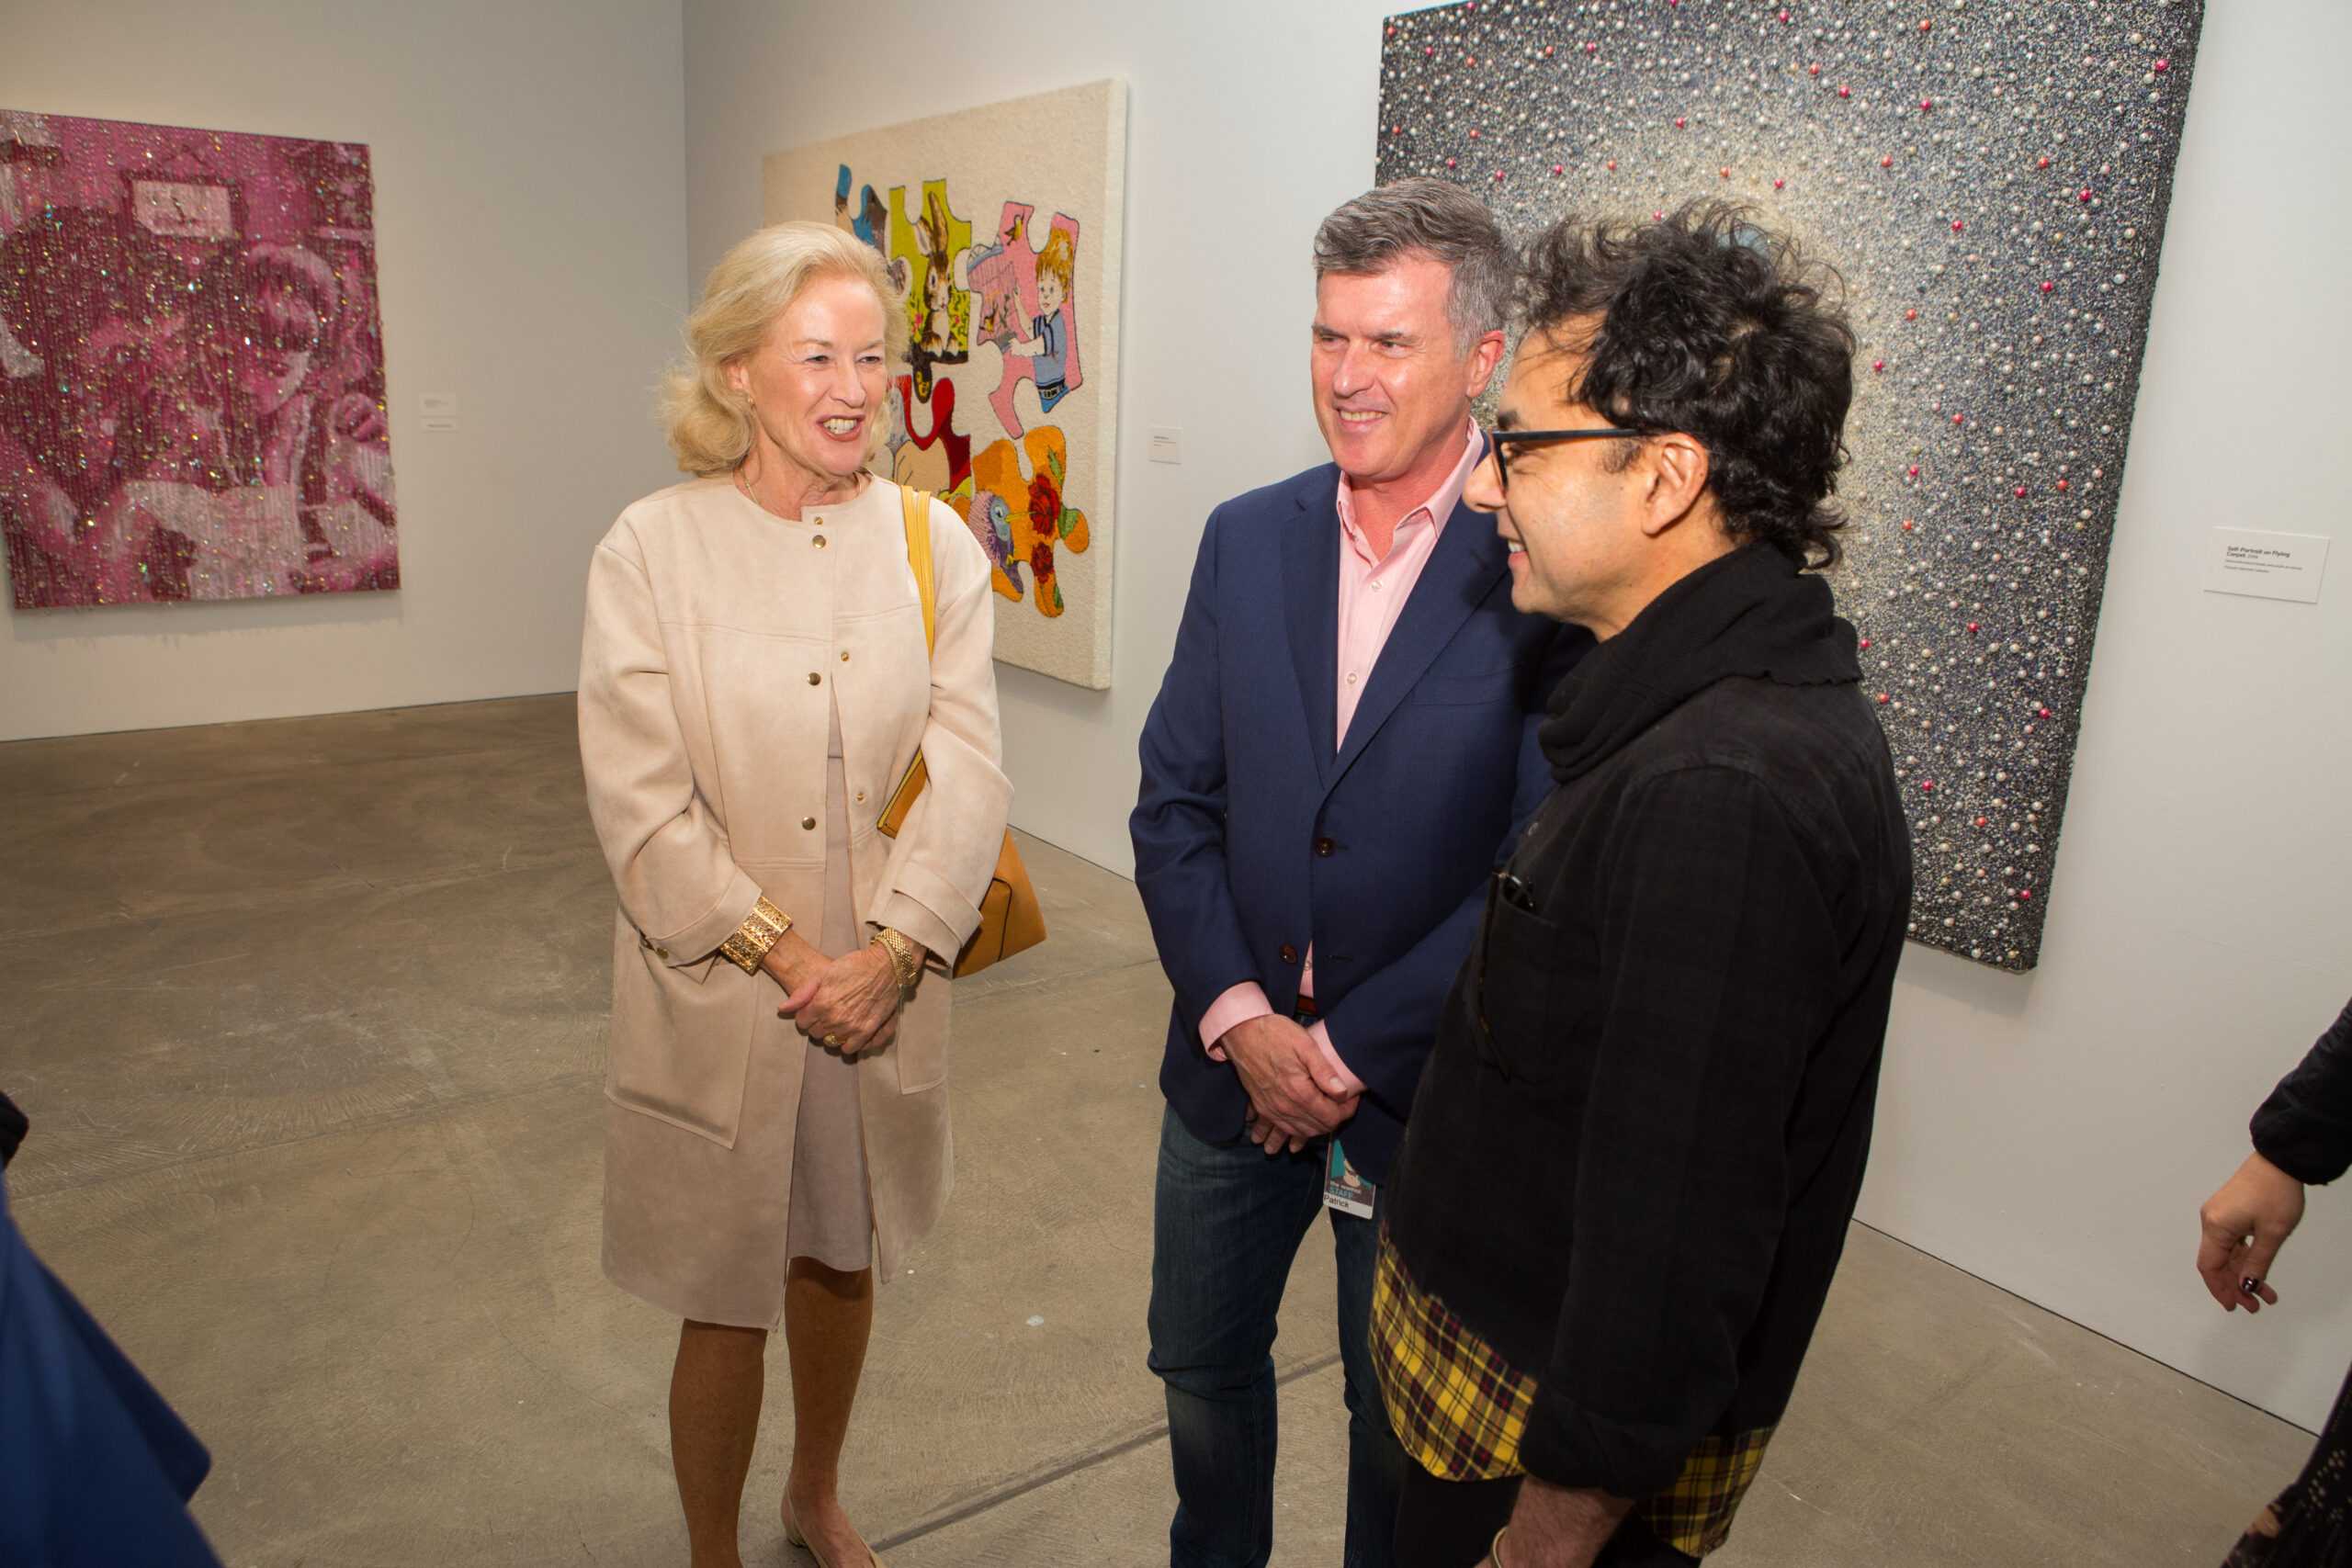 A Portrait Society and Board Member stands with Warhol Museum Director, Patrick Moore and artist, Farhad Moshiri as they look on to one of the artist’s featured pieces in the show.